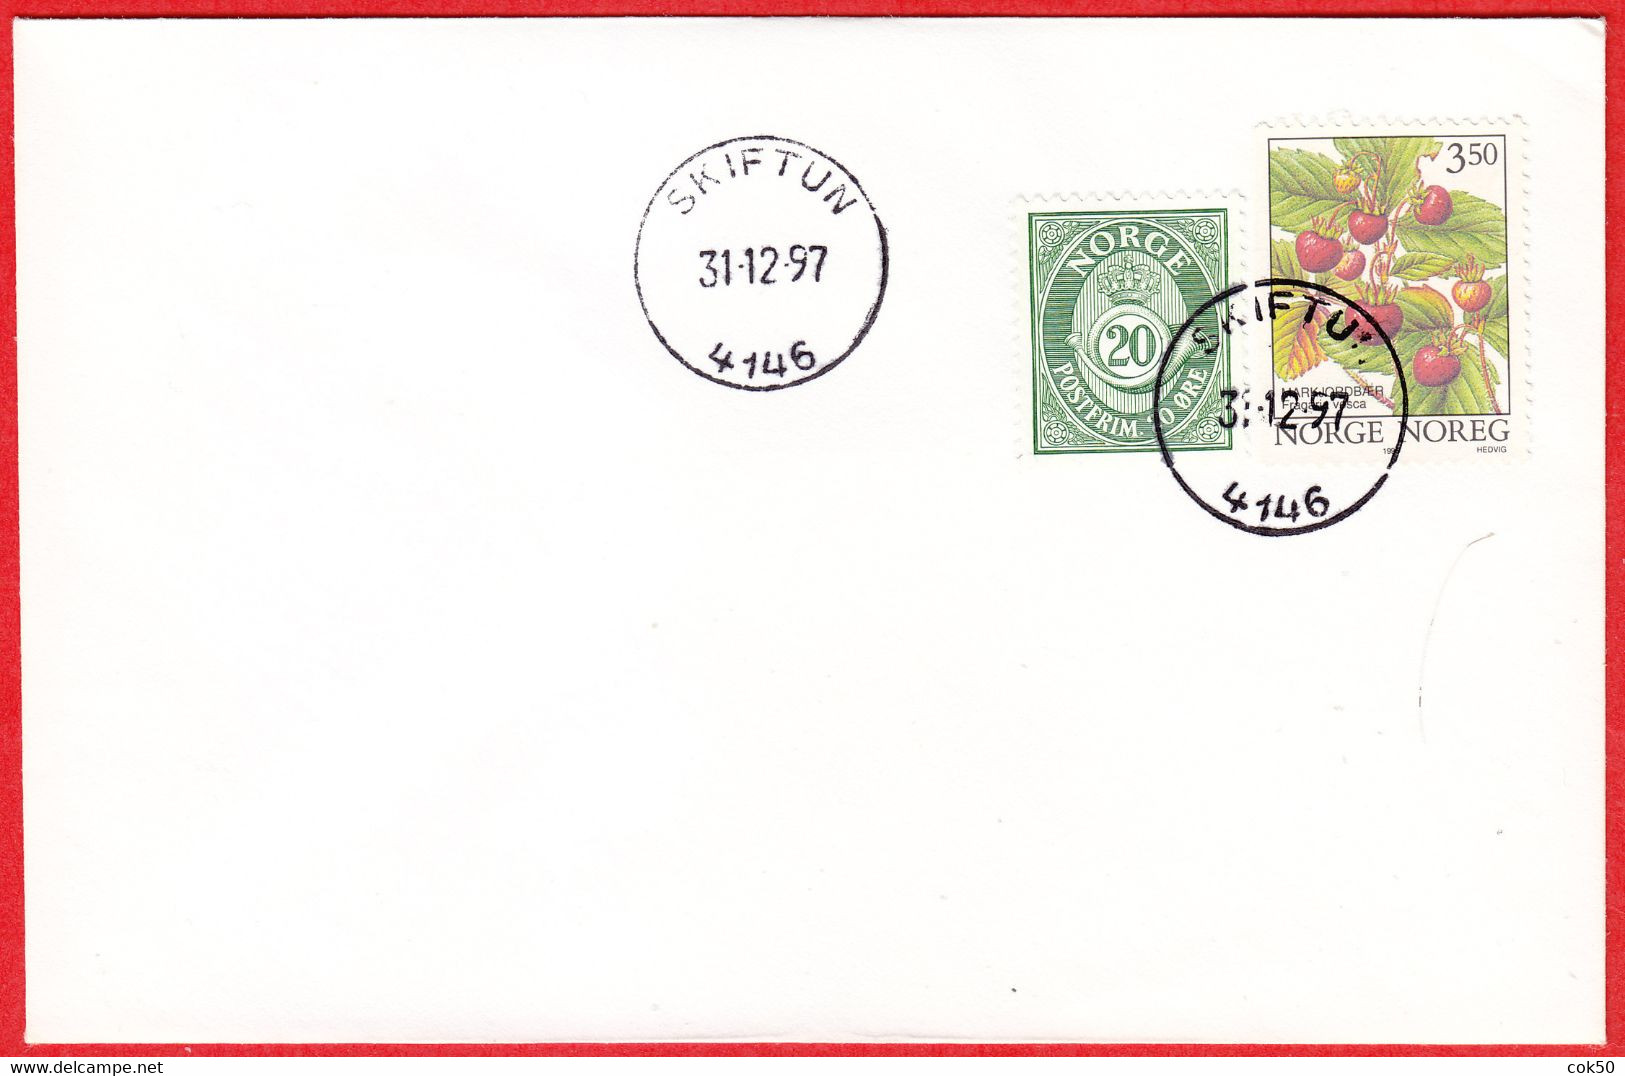 NORWAY - 4146 SKIFTUN (Rogaland County) - Last Day/postoffice Closed On 1997.12.31 - Local Post Stamps